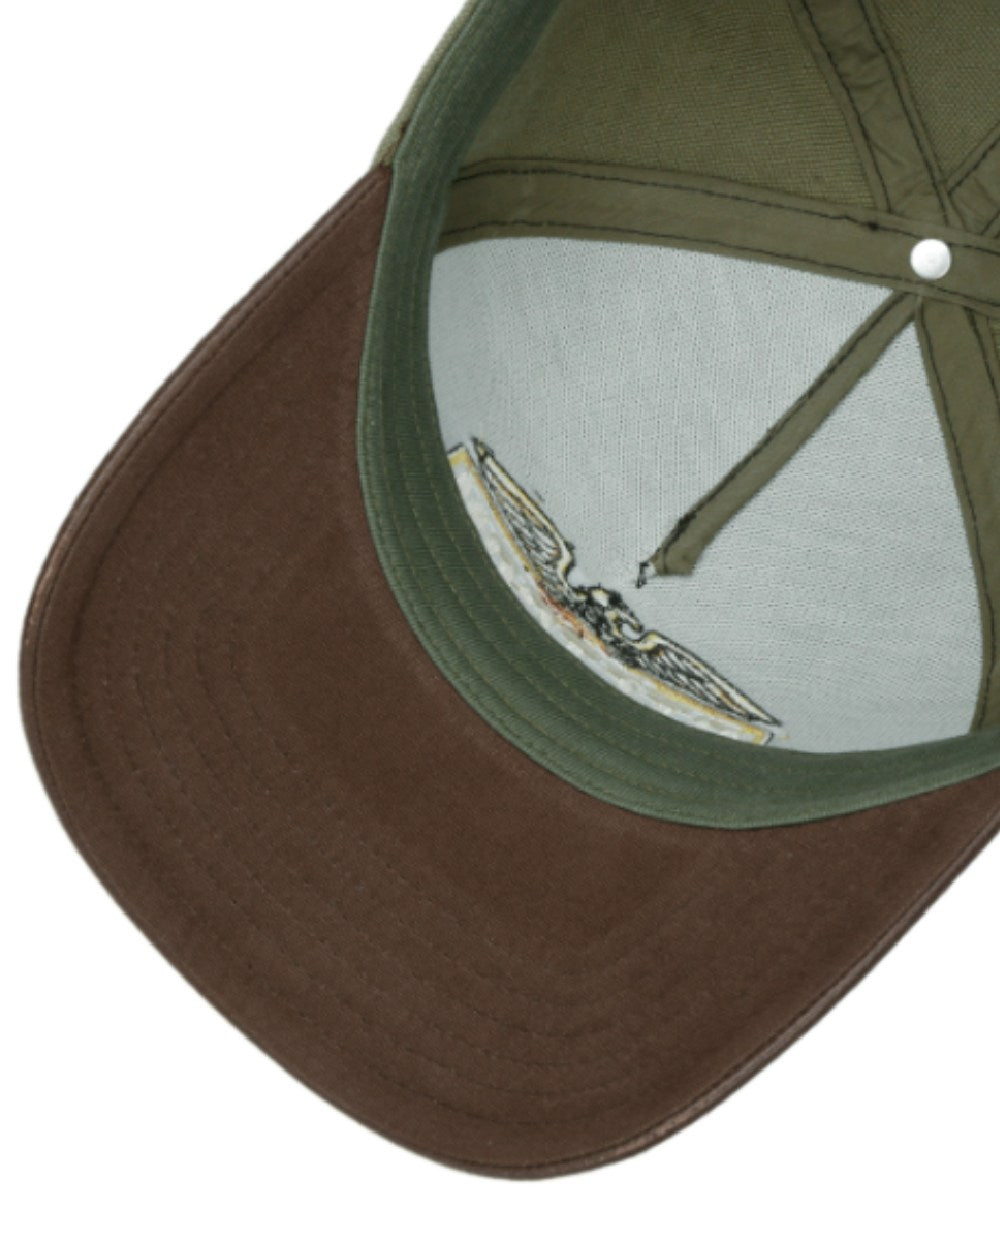 Green/Brown coloured Stetson Army Trucker Cap on White background 